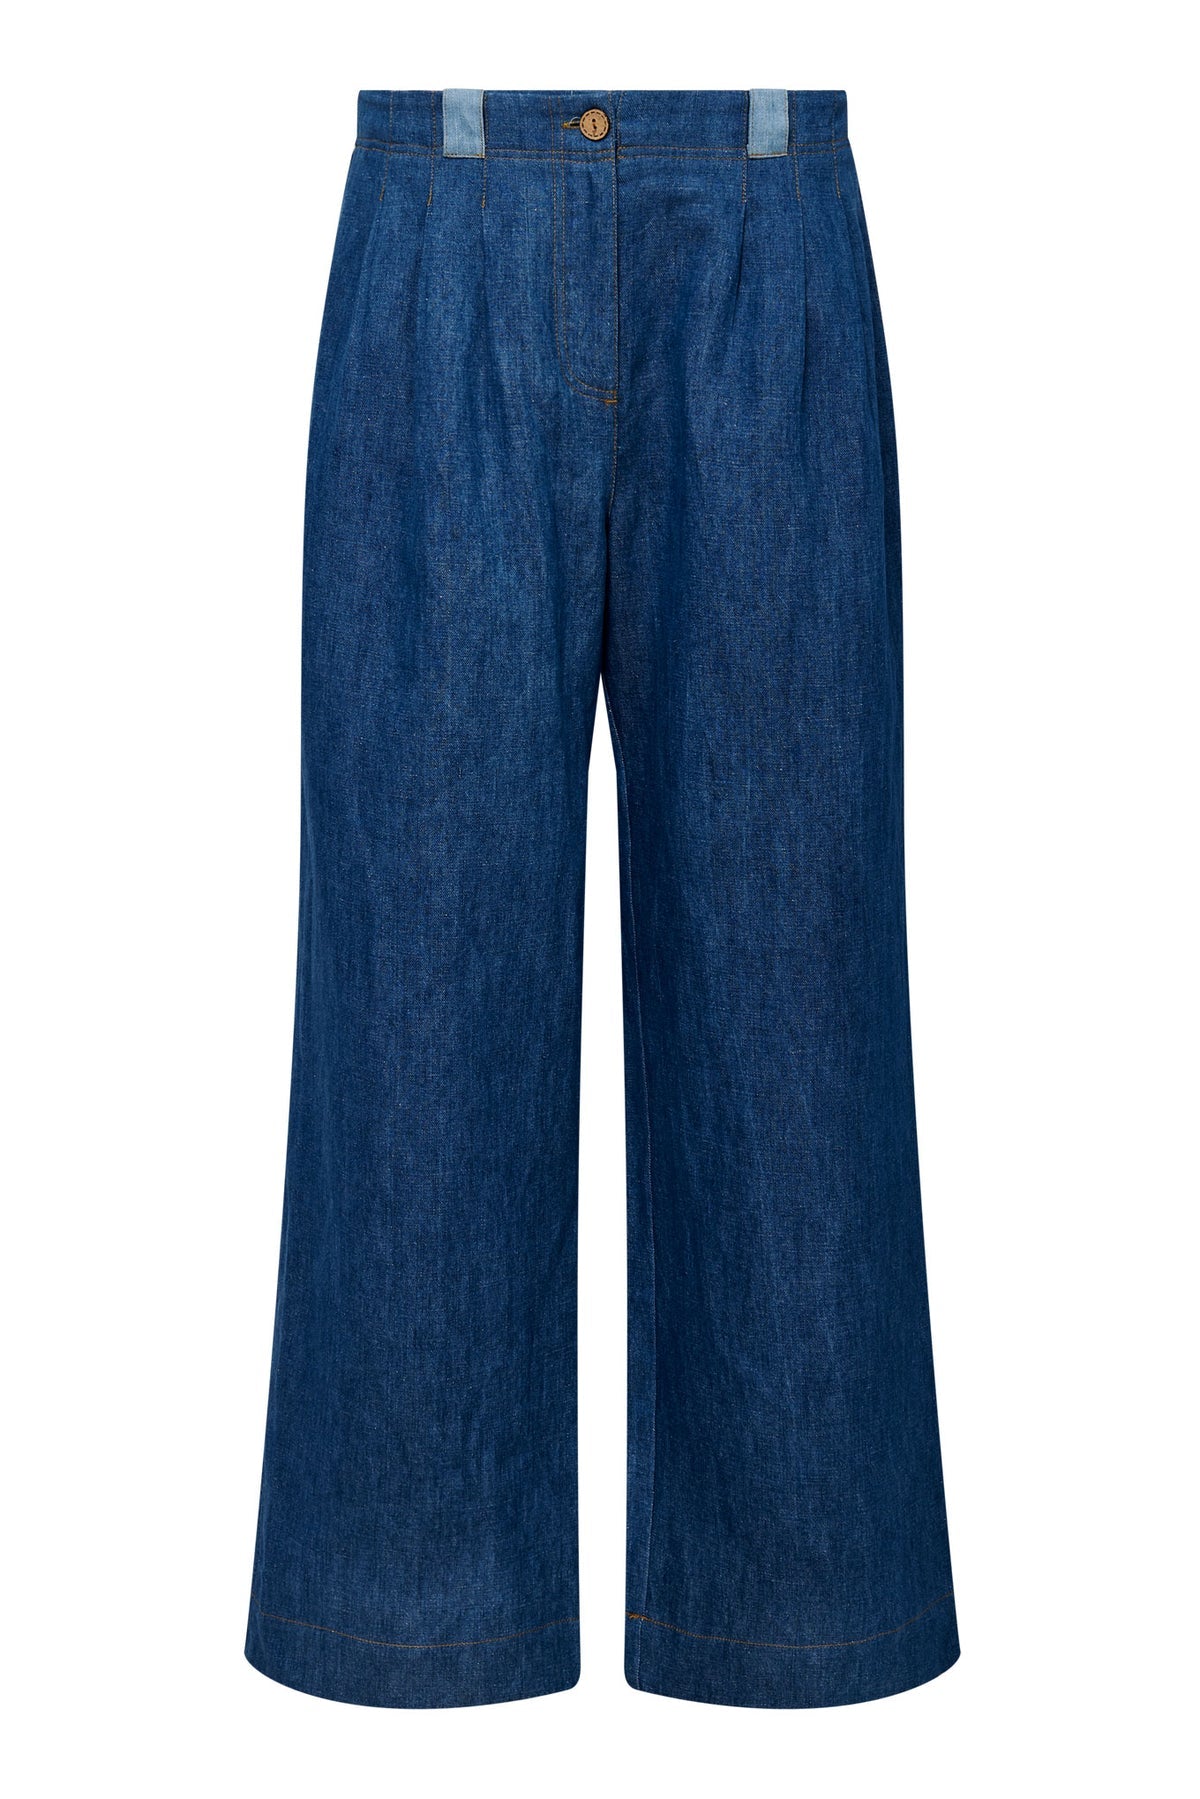 Lola trousers - Blue patchwork